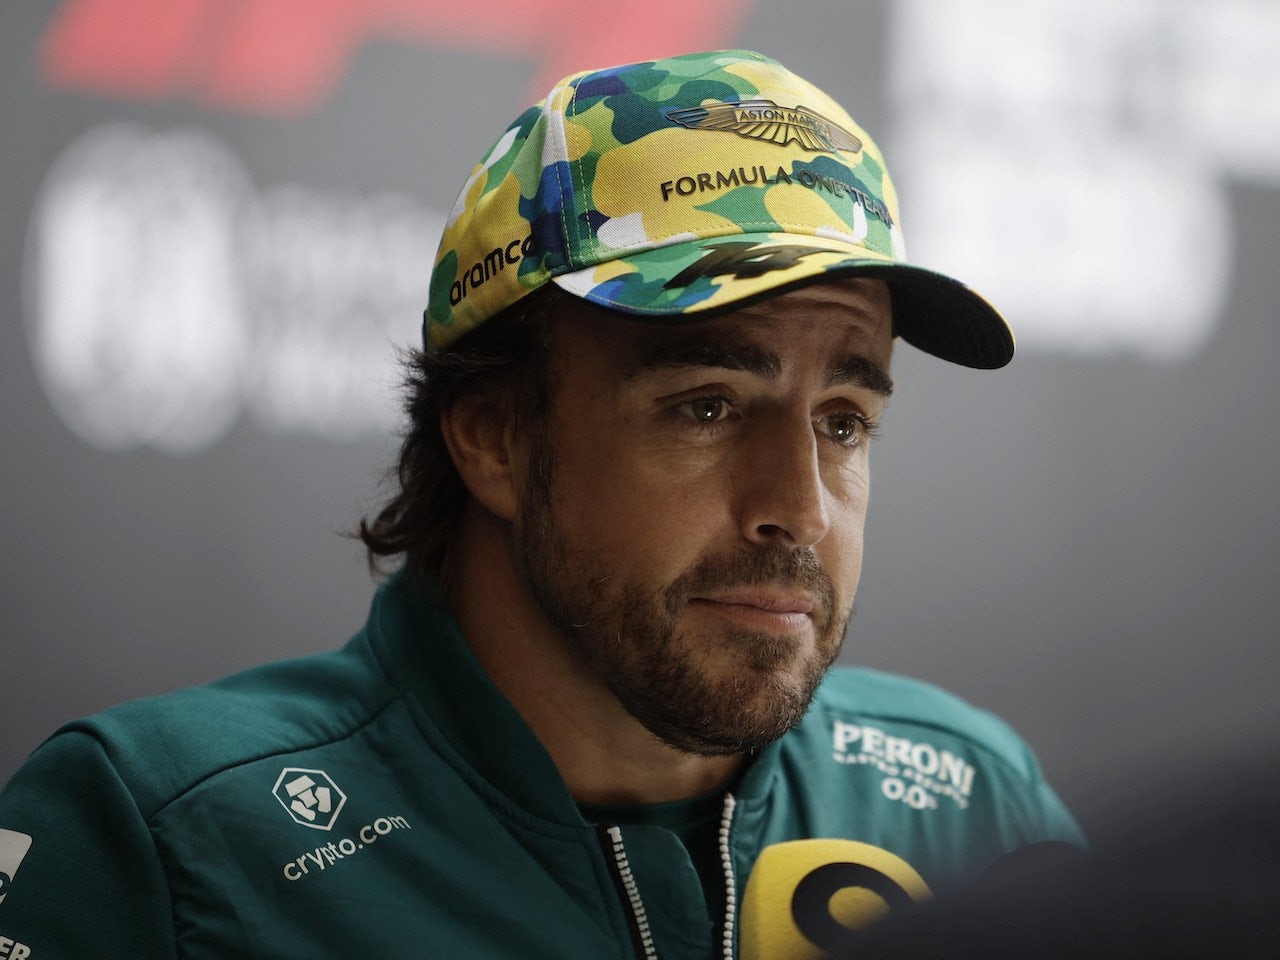 Alonso probably started Red Bull rumours - Marko